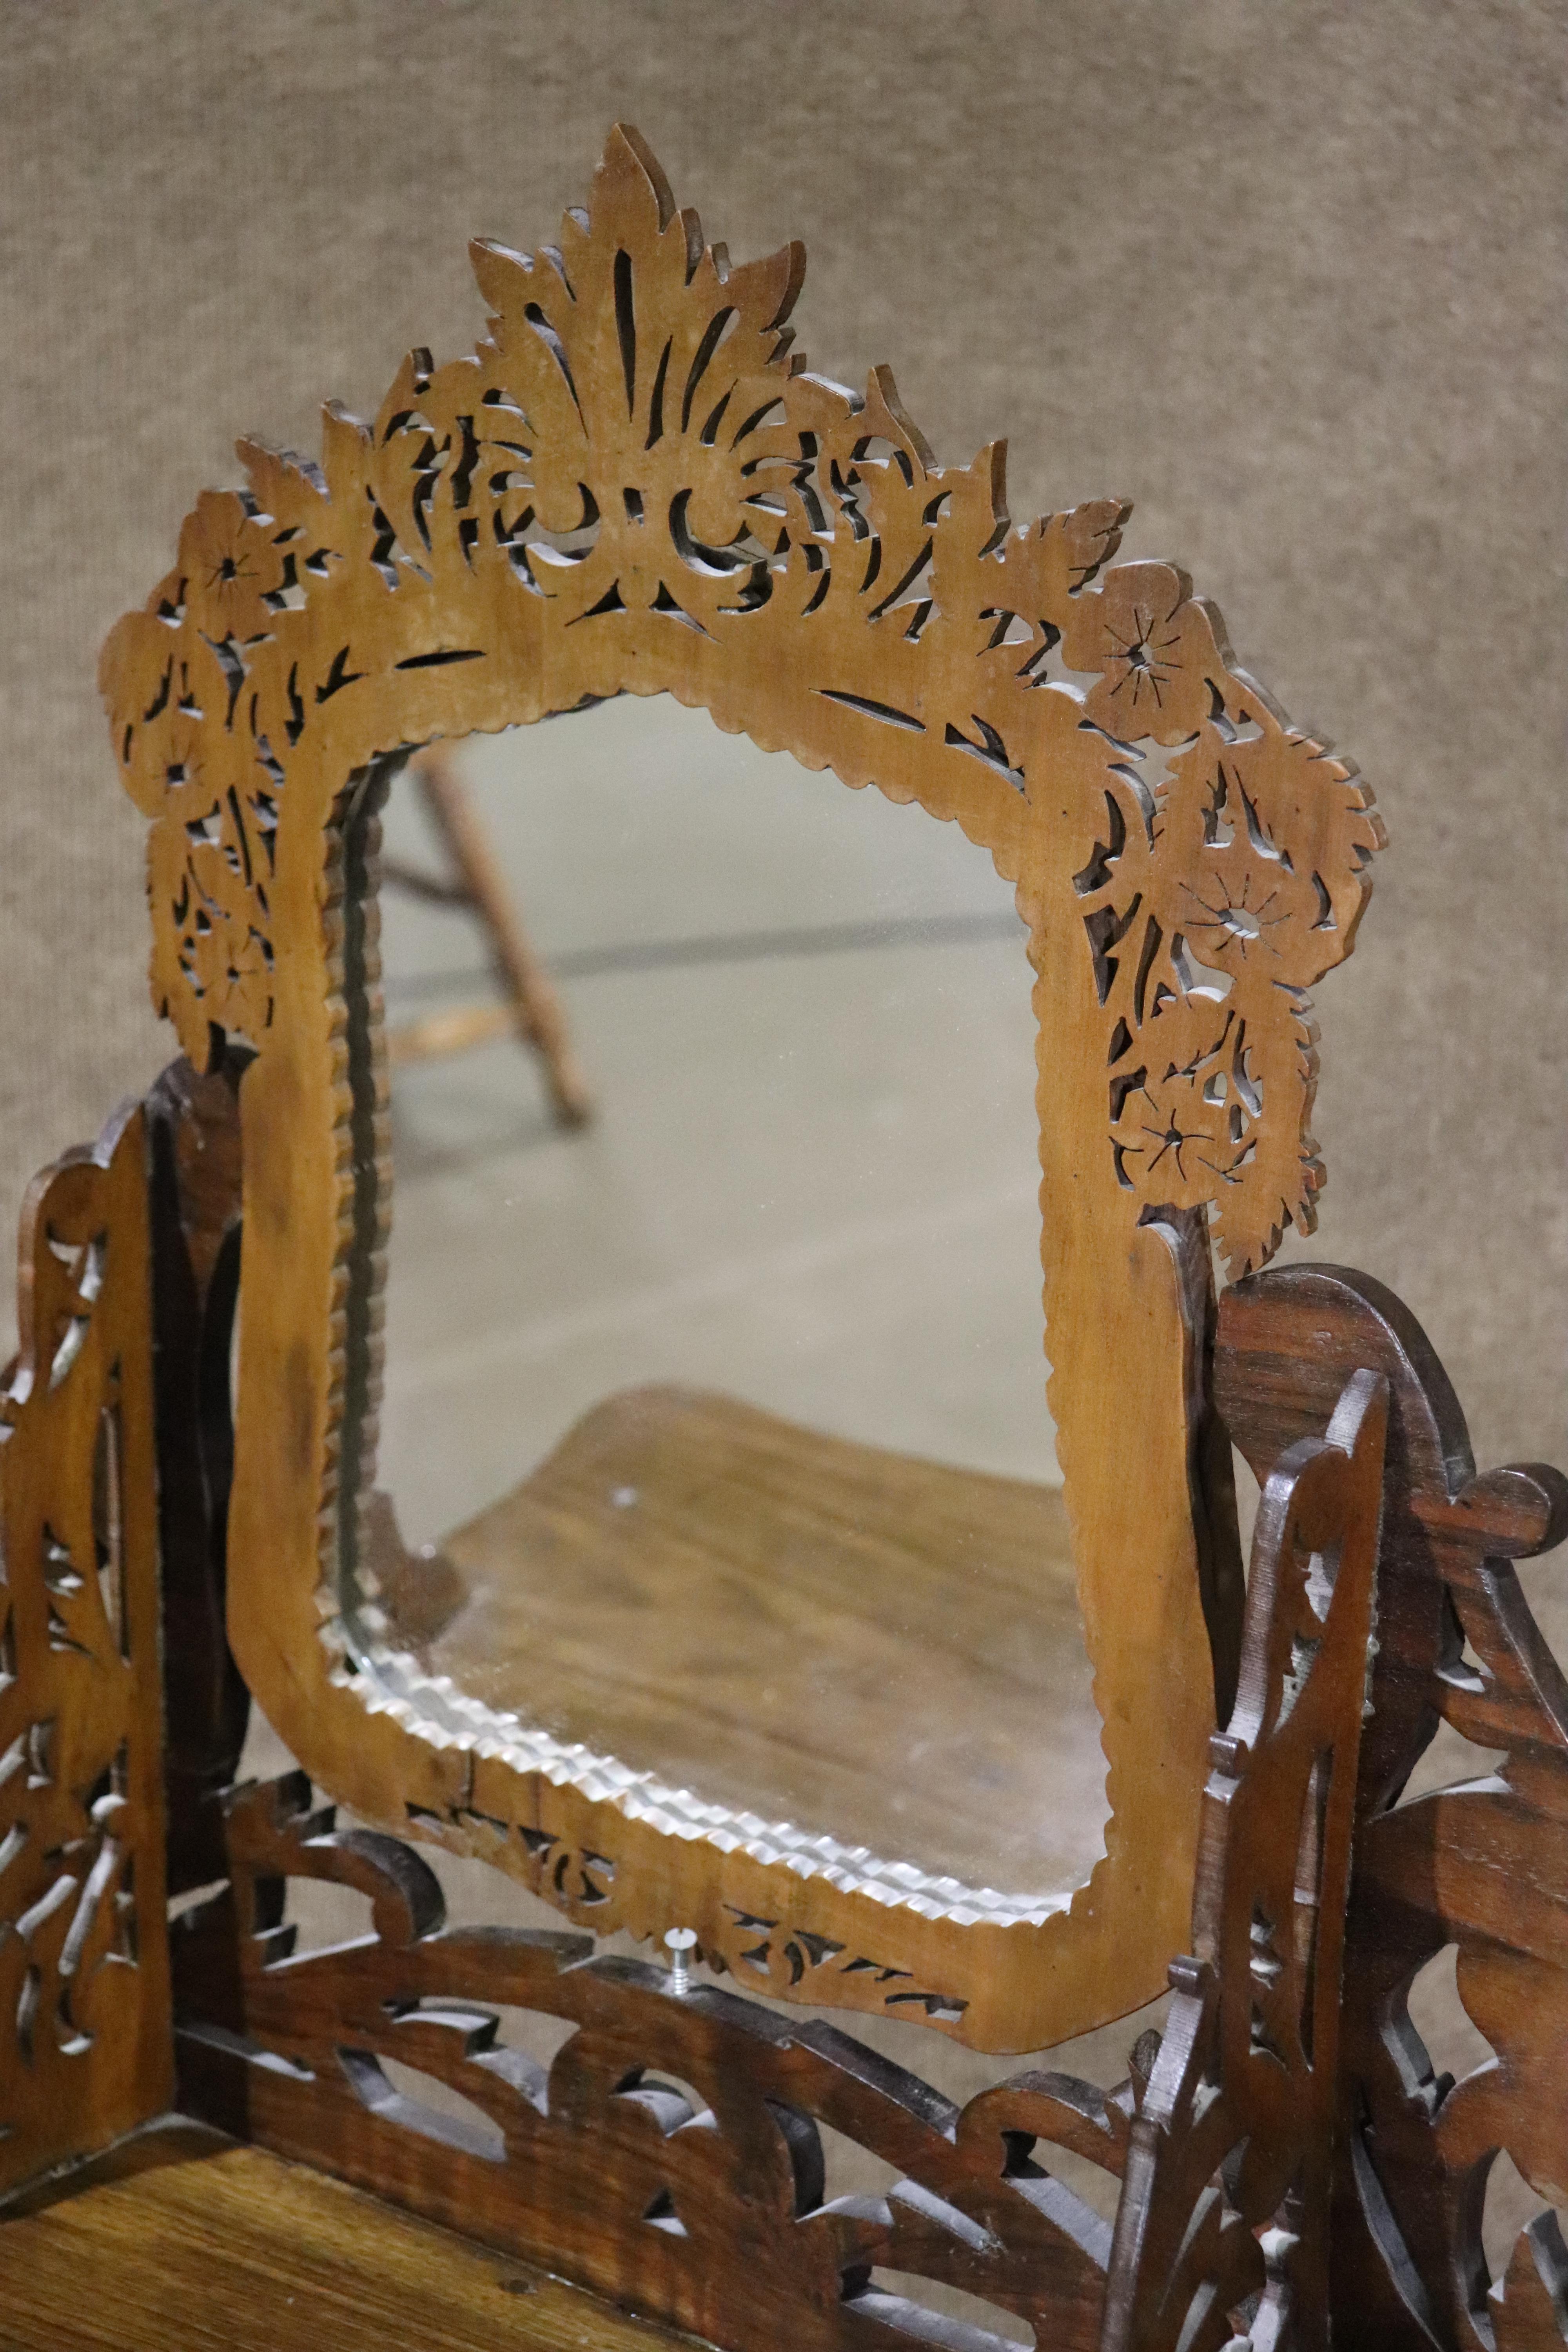 This small wood vanity features carved wood throughout. Intricate cut out designs with single drawer.
Please confirm location NY or NJ